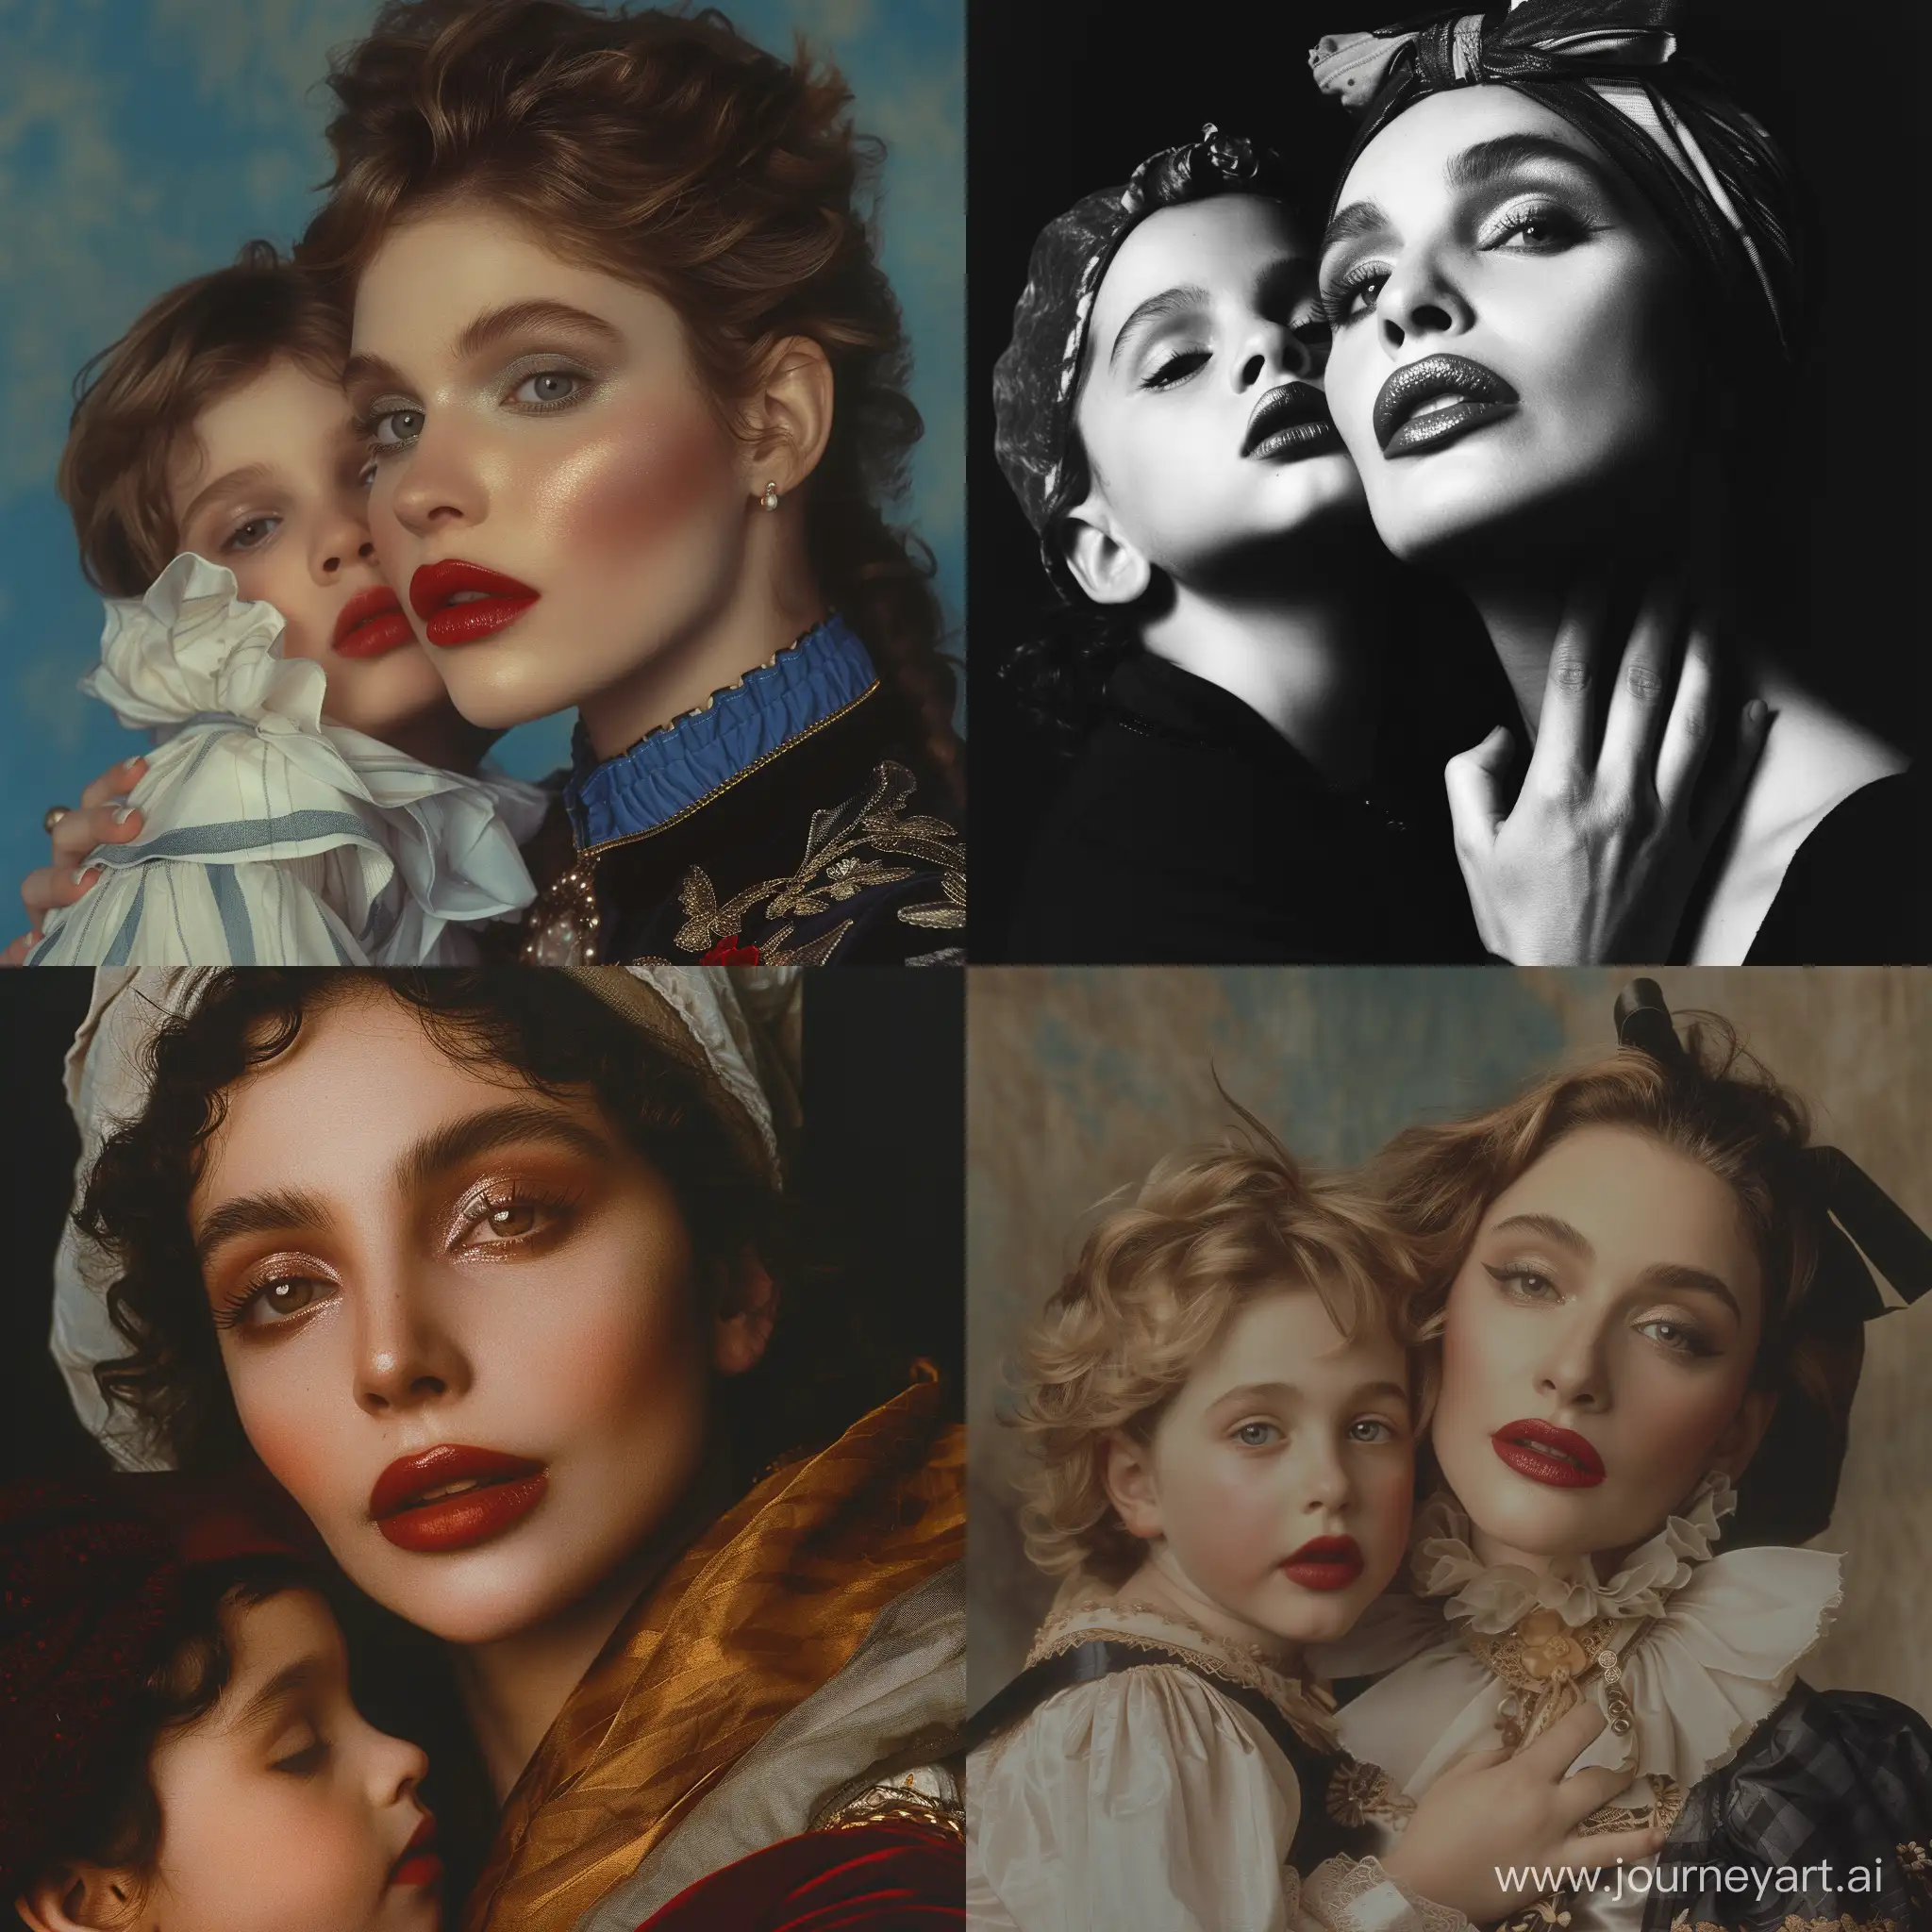 MadonnaInspired-90s-Studio-Portrait-Plump-Lips-and-High-Detail-Makeup